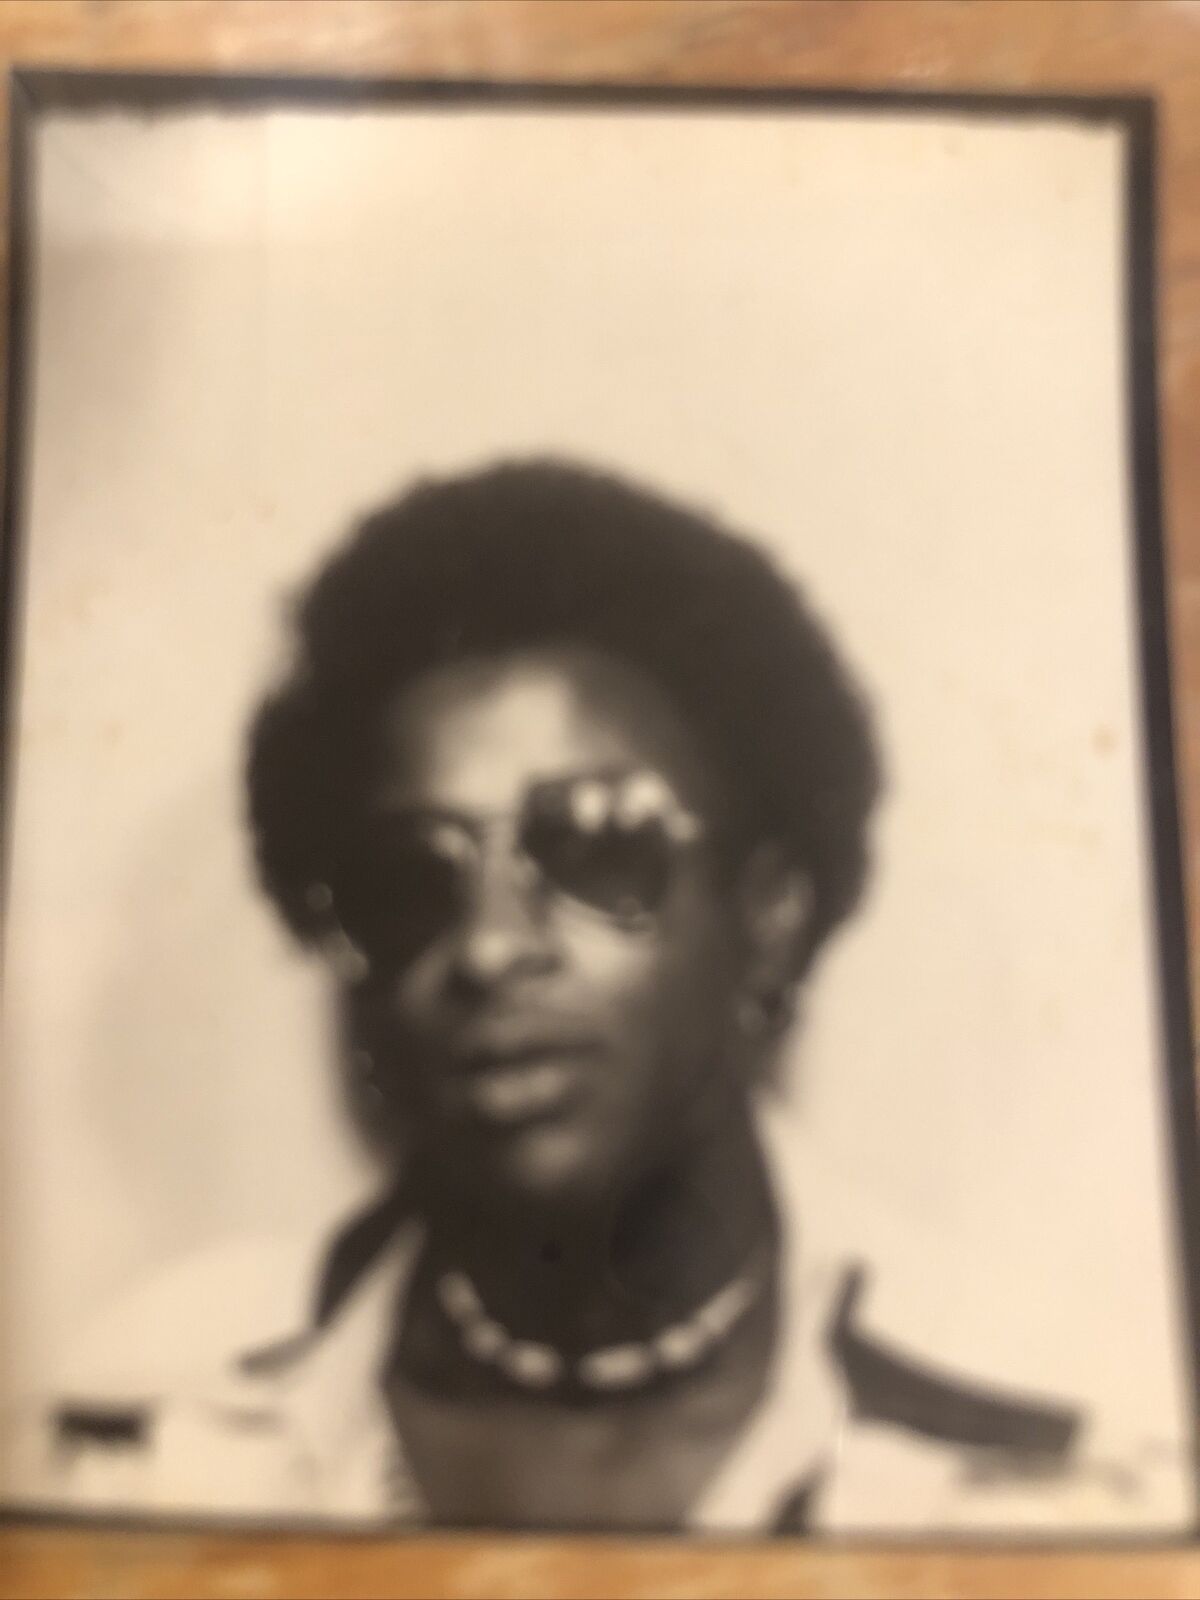 Sly Stone Photo Booth Picture Original